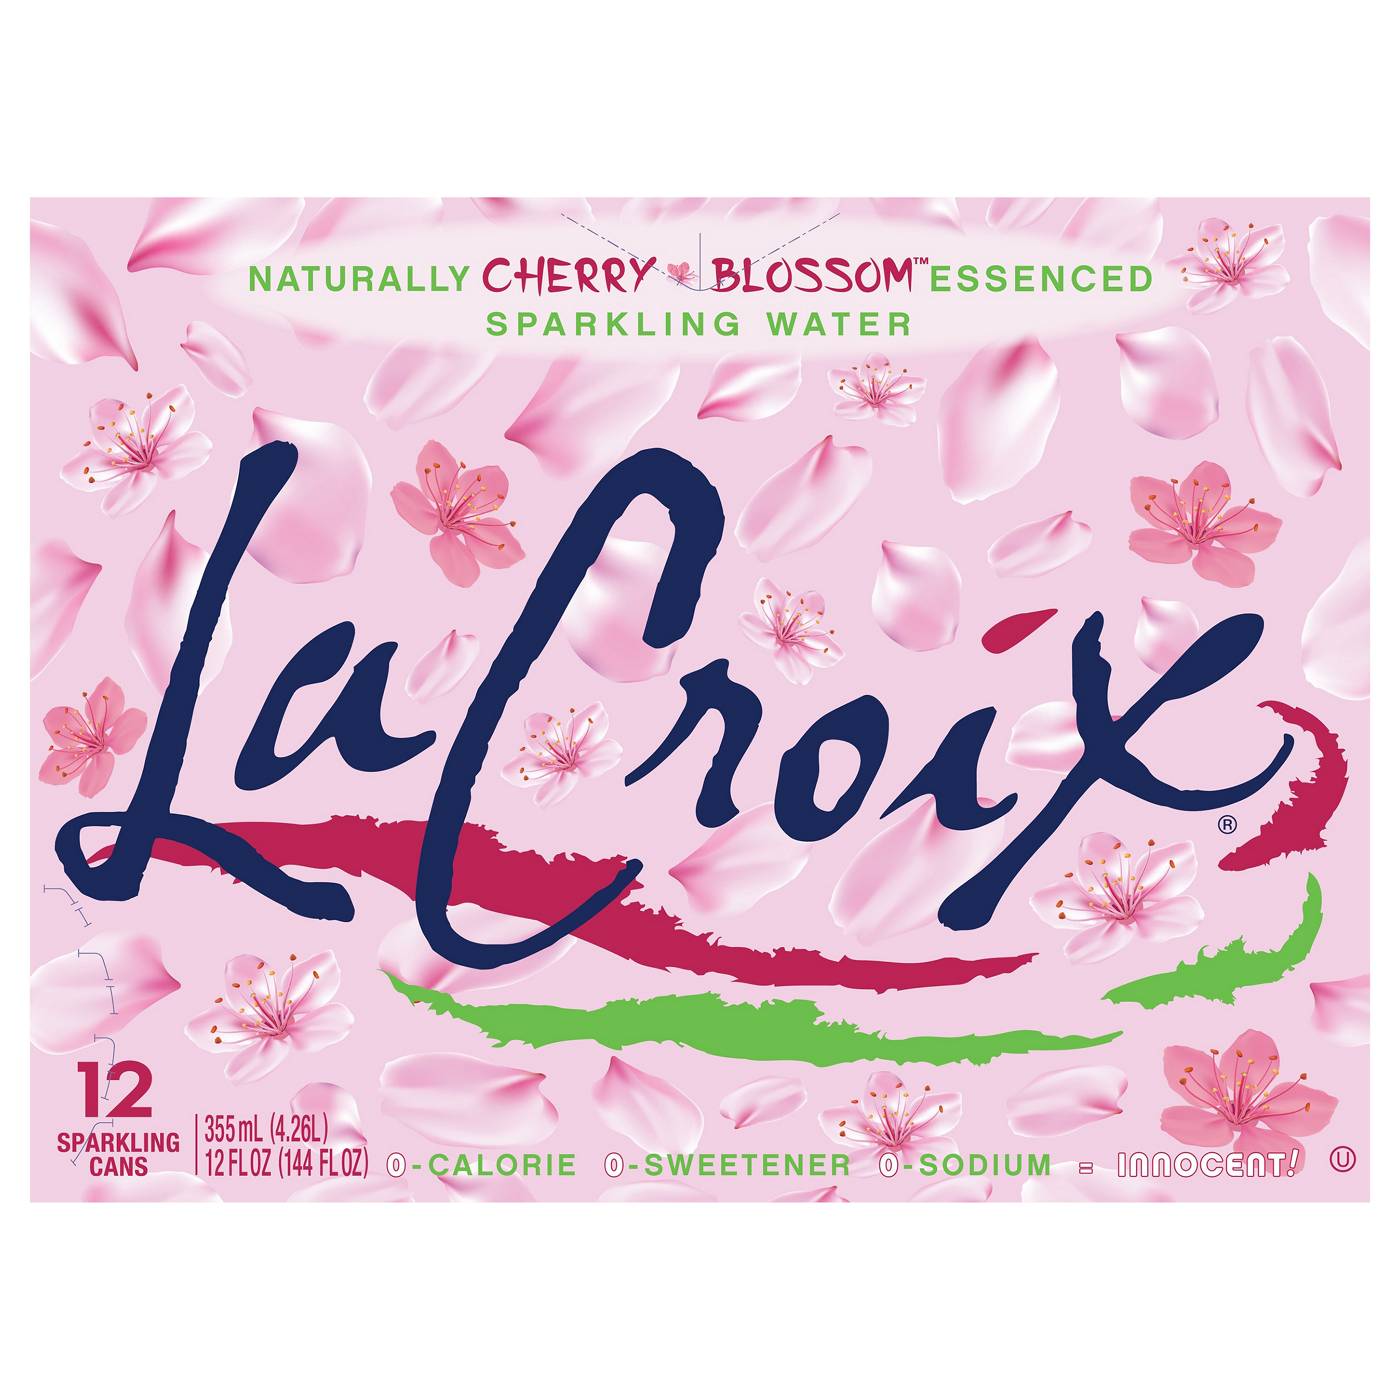 LaCroix Cherry Blossom Sparkling Water 12 oz Cans; image 1 of 4